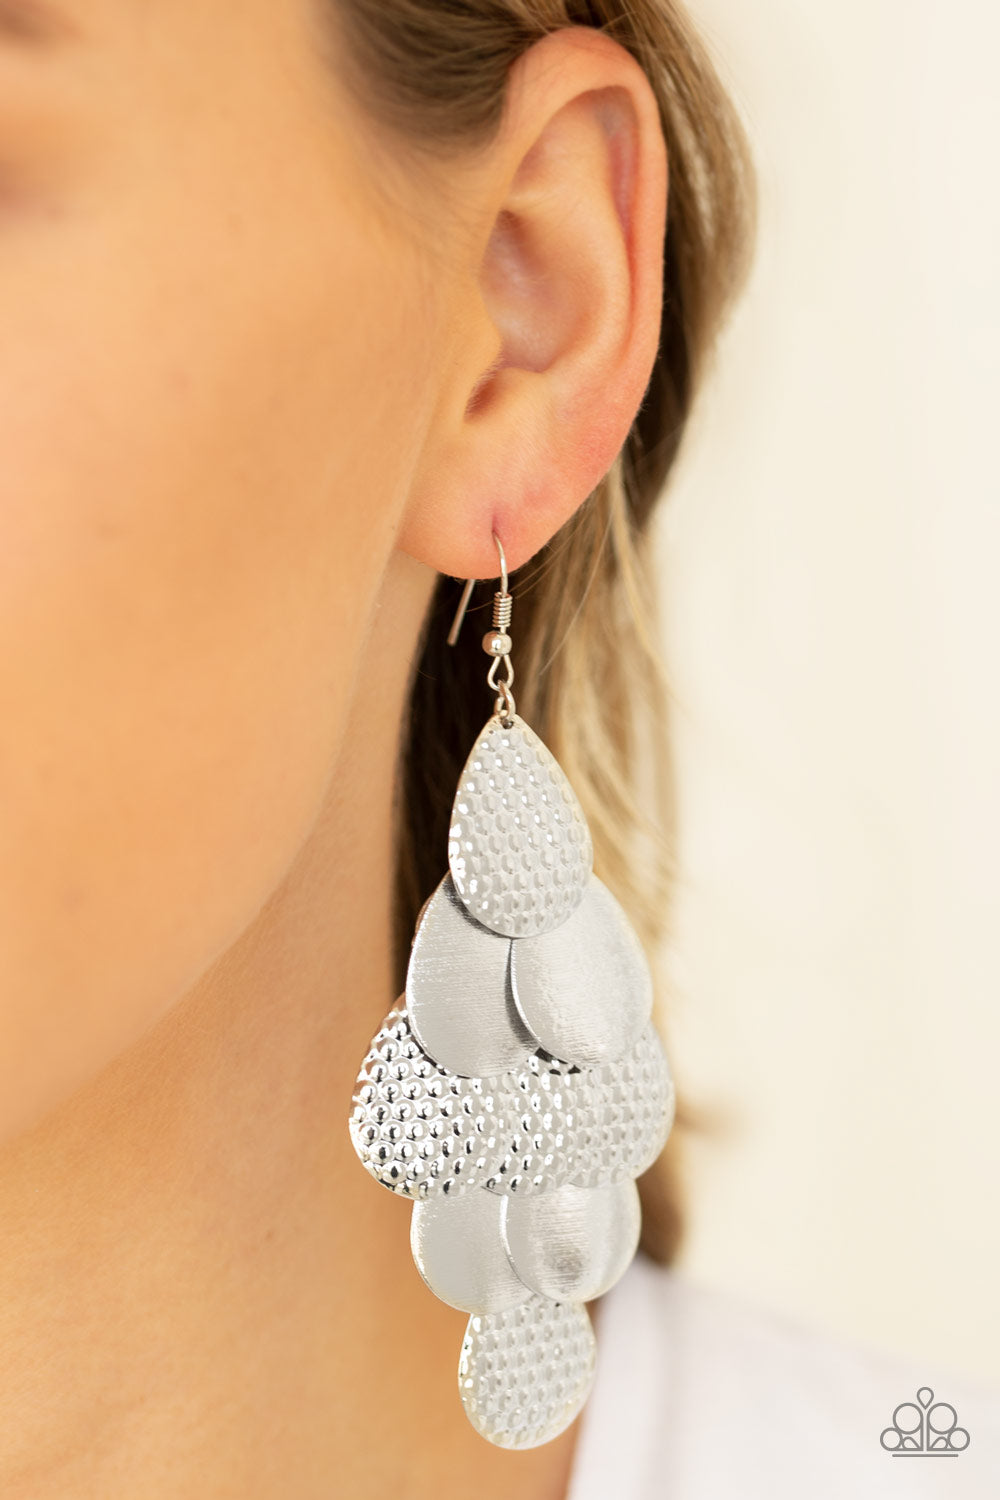 Chime Time - Silver earrings